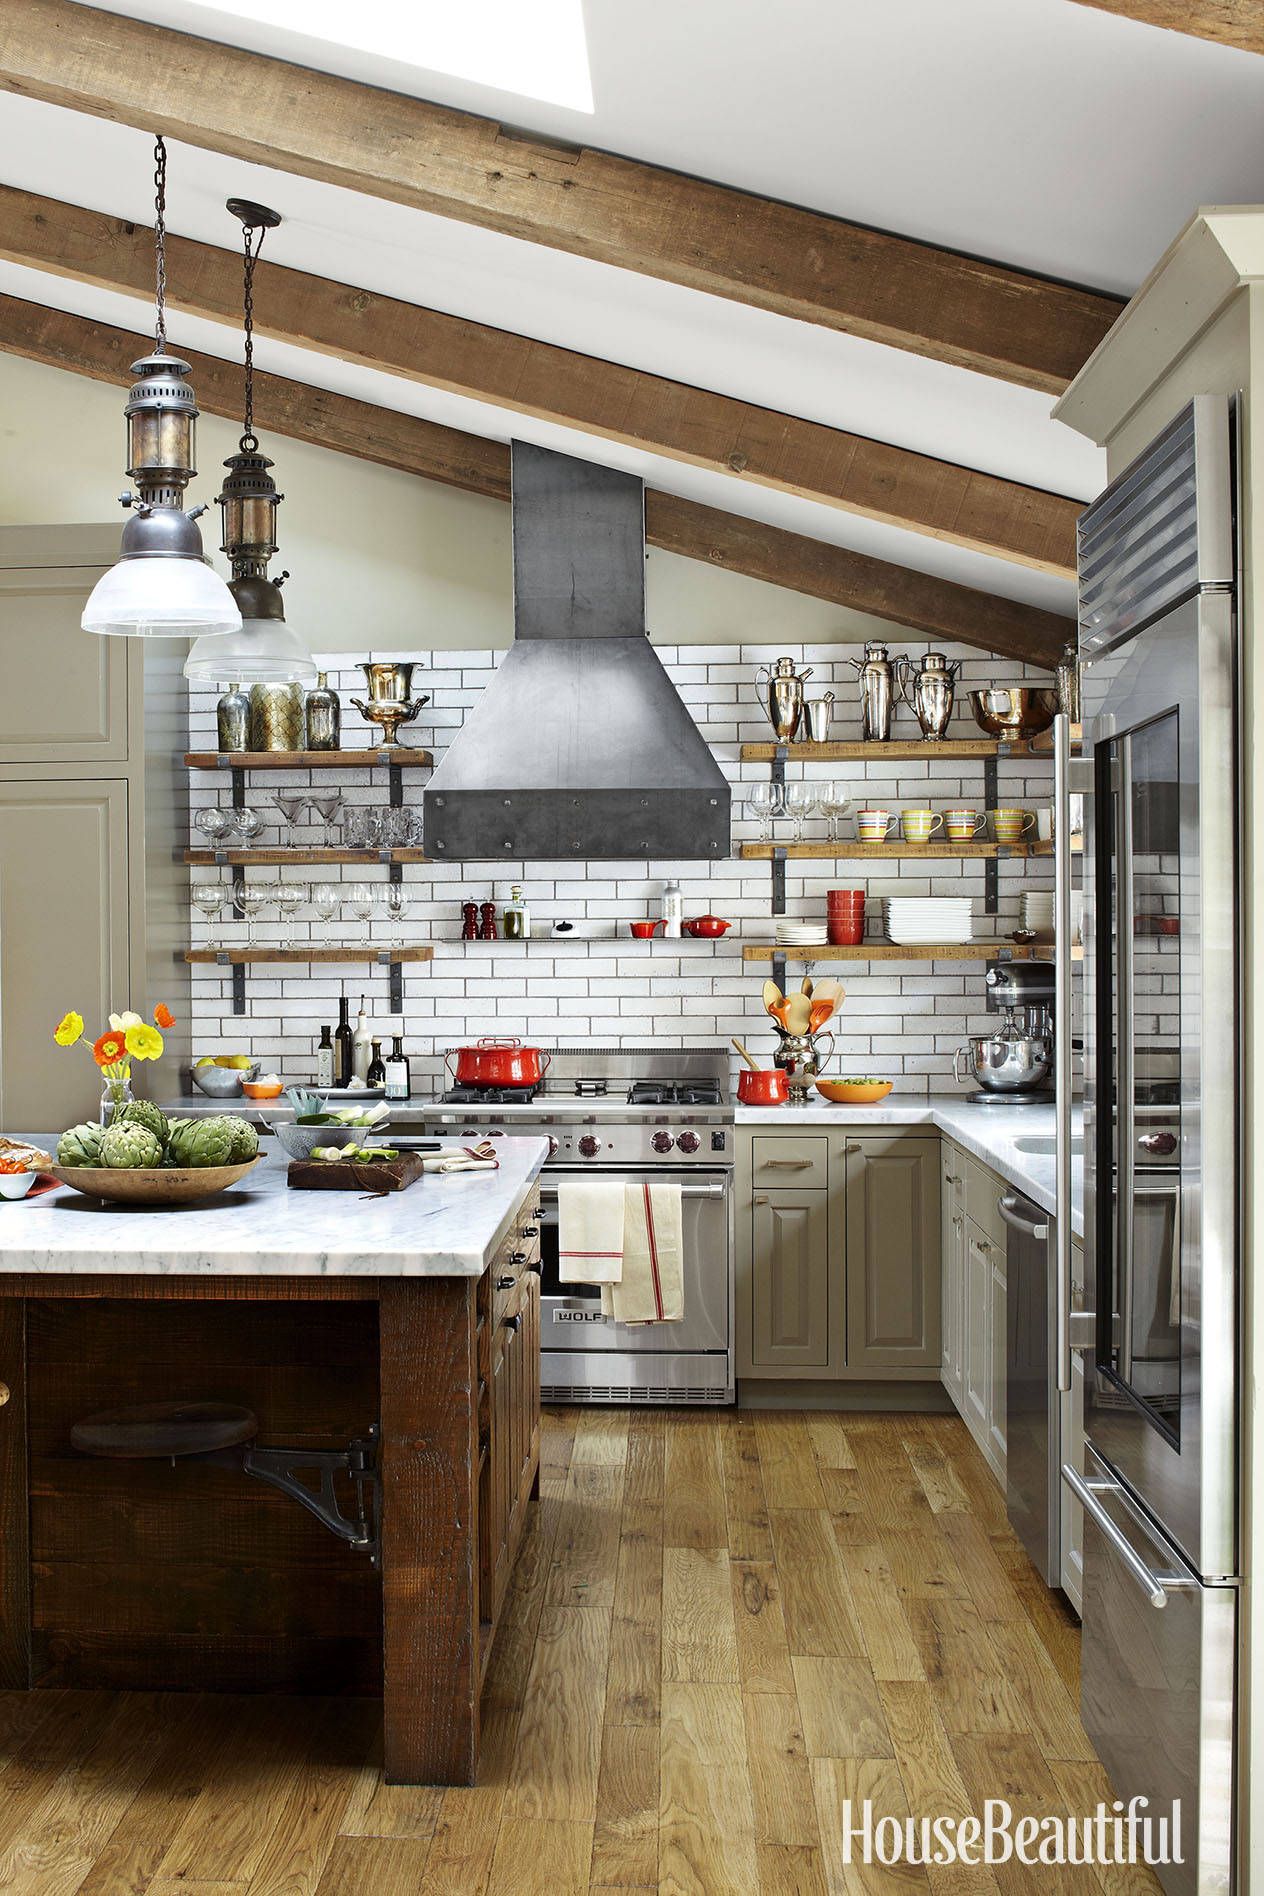 Open Shelving Ideas for the Kitchen - Live Creatively Inspired